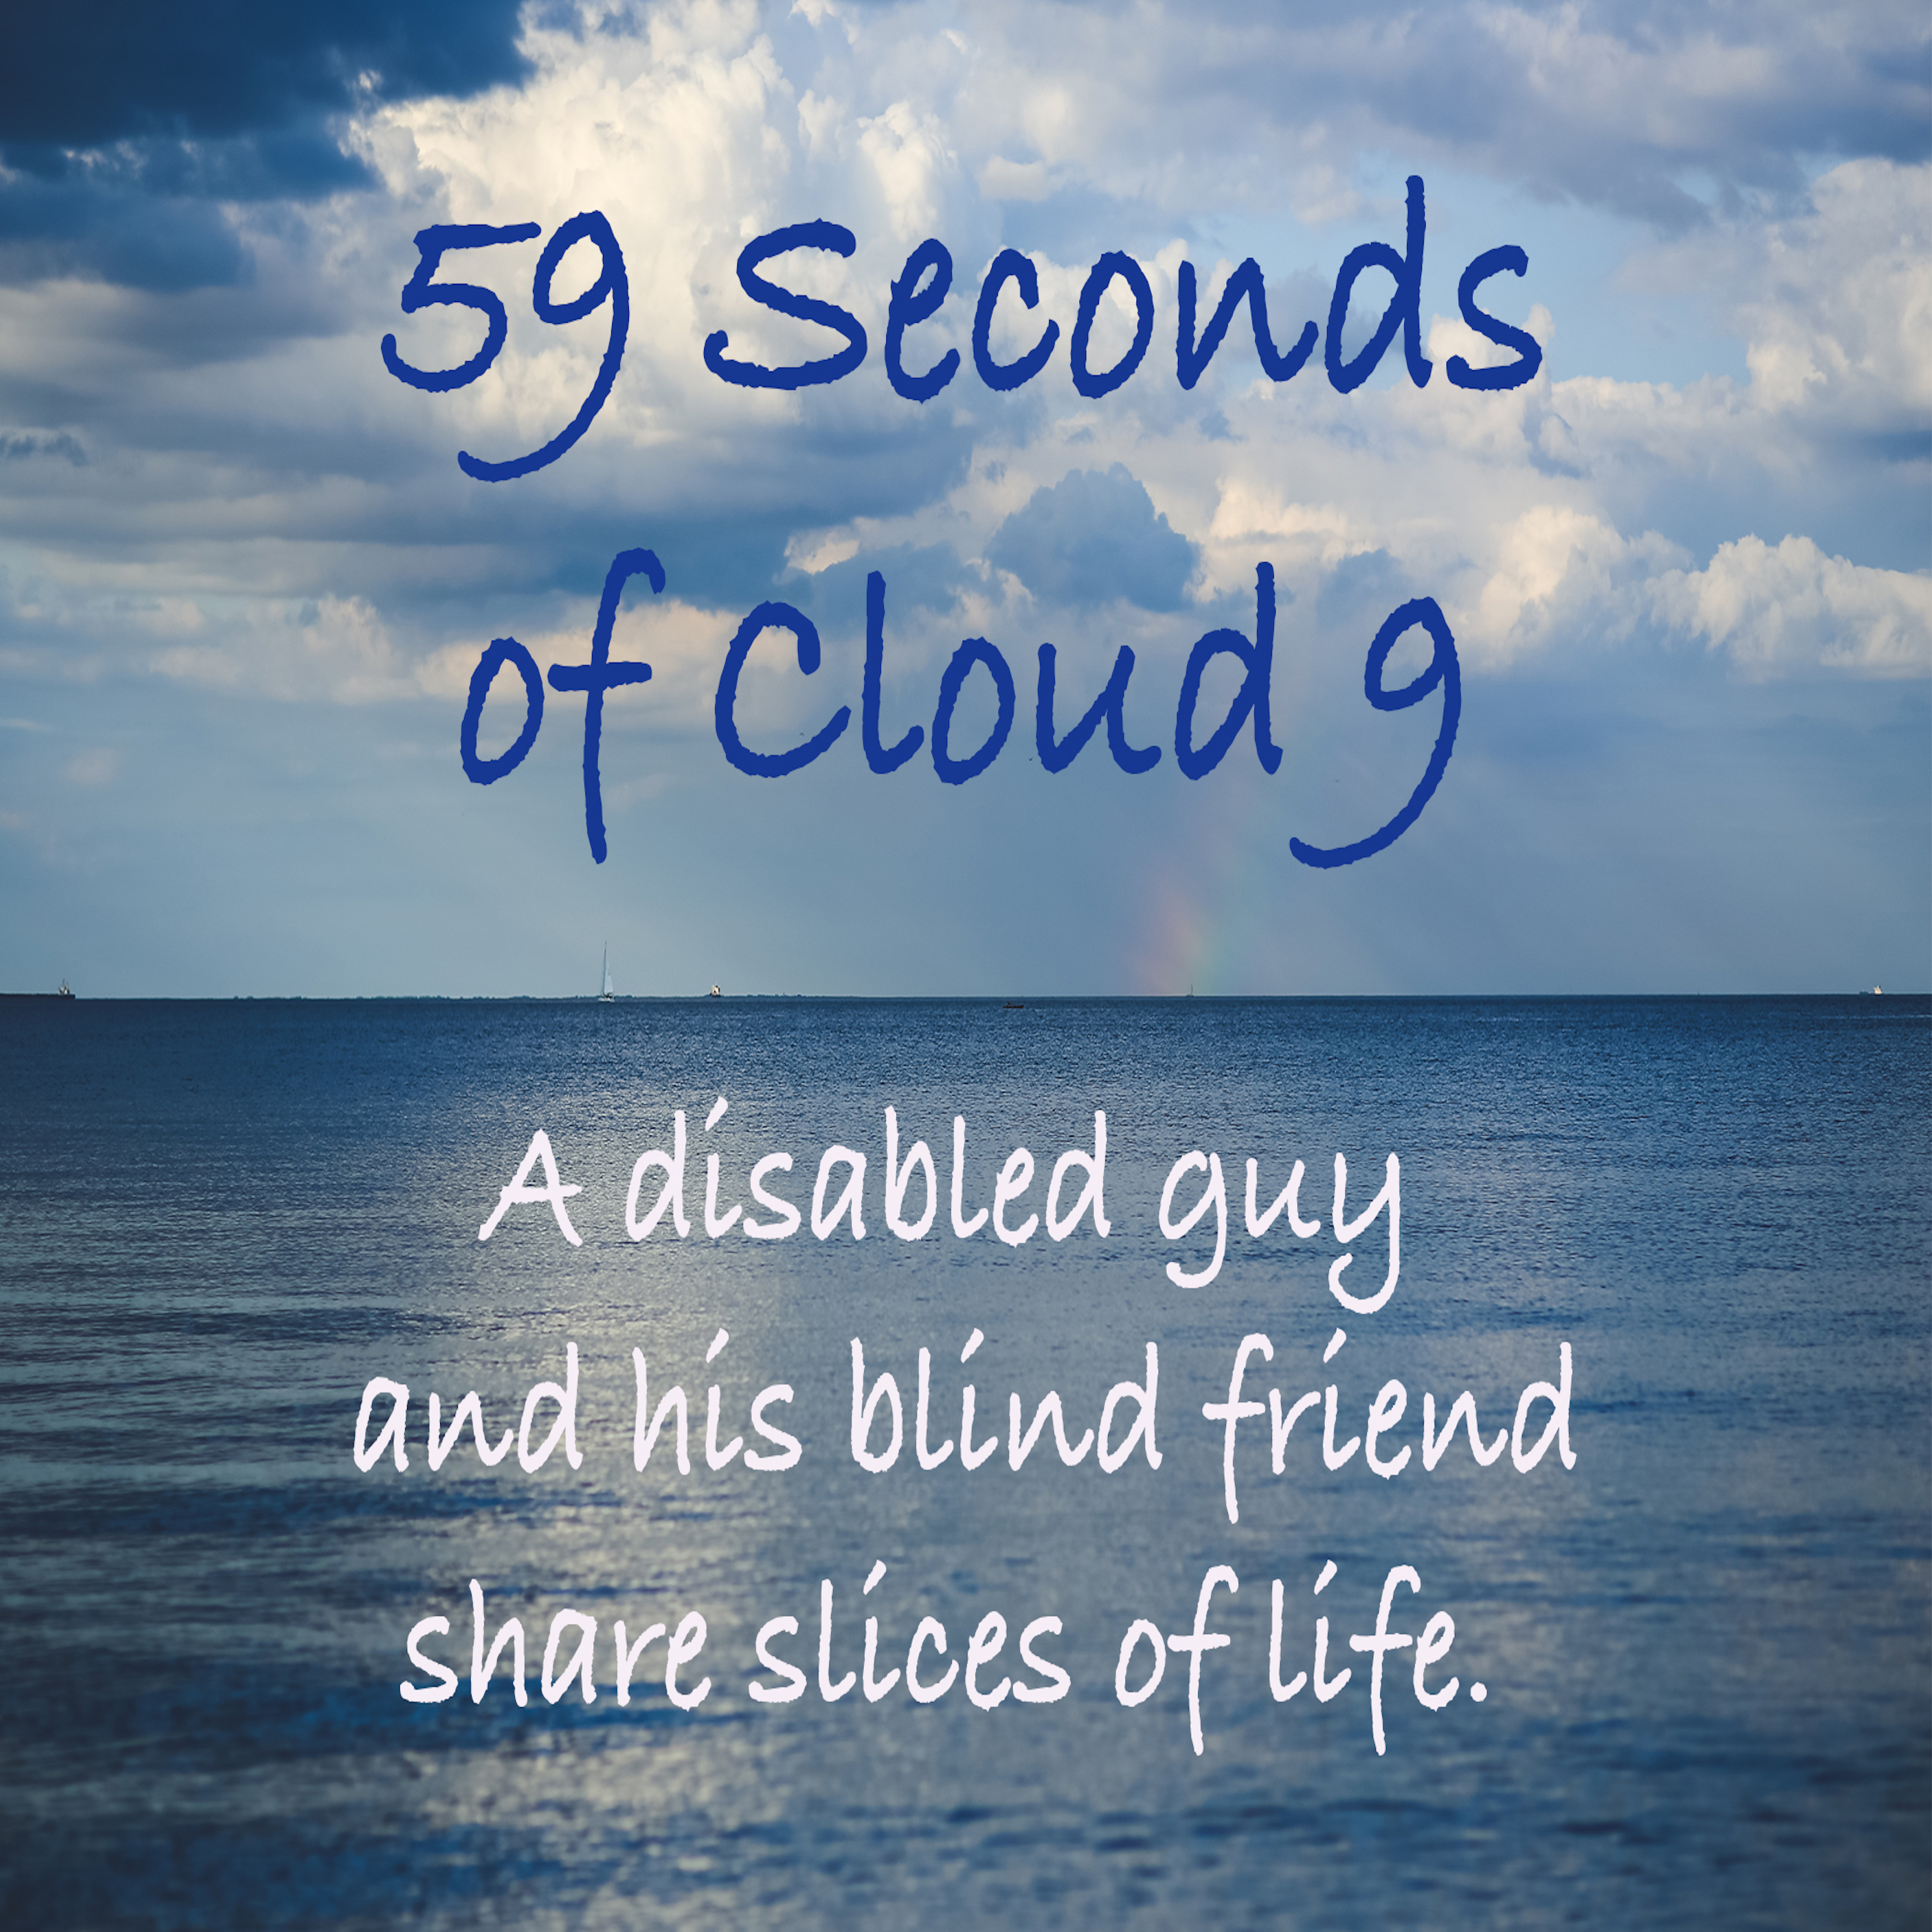 59 Seconds of Cloud 9 – Limping On Cloud 9 Podcast artwork